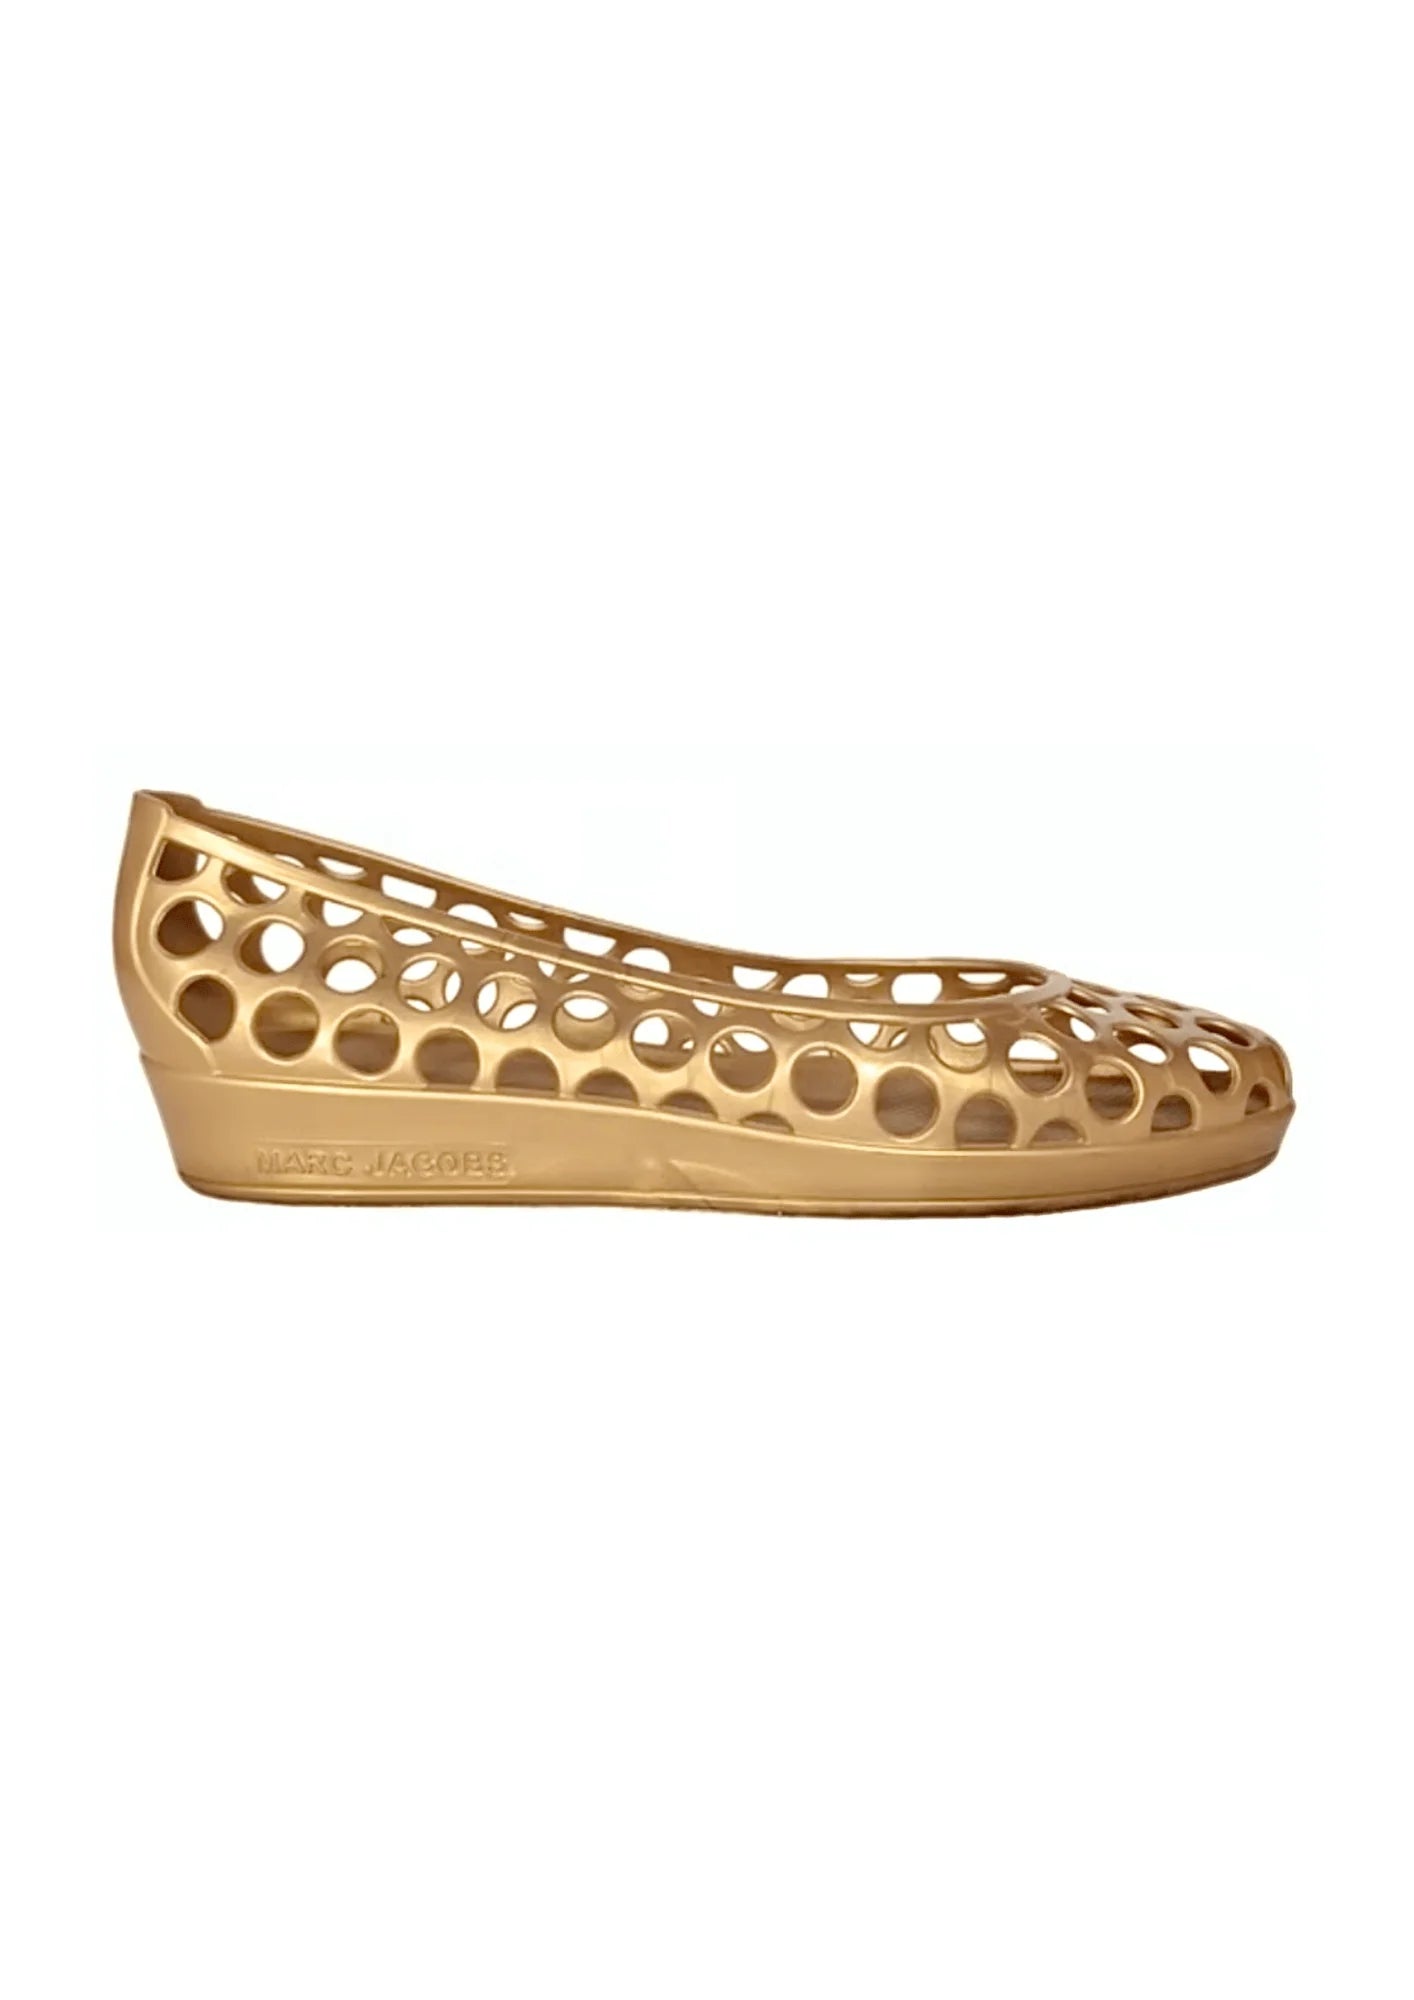 GOLD SURF JELLY PERFORATED SANDALS